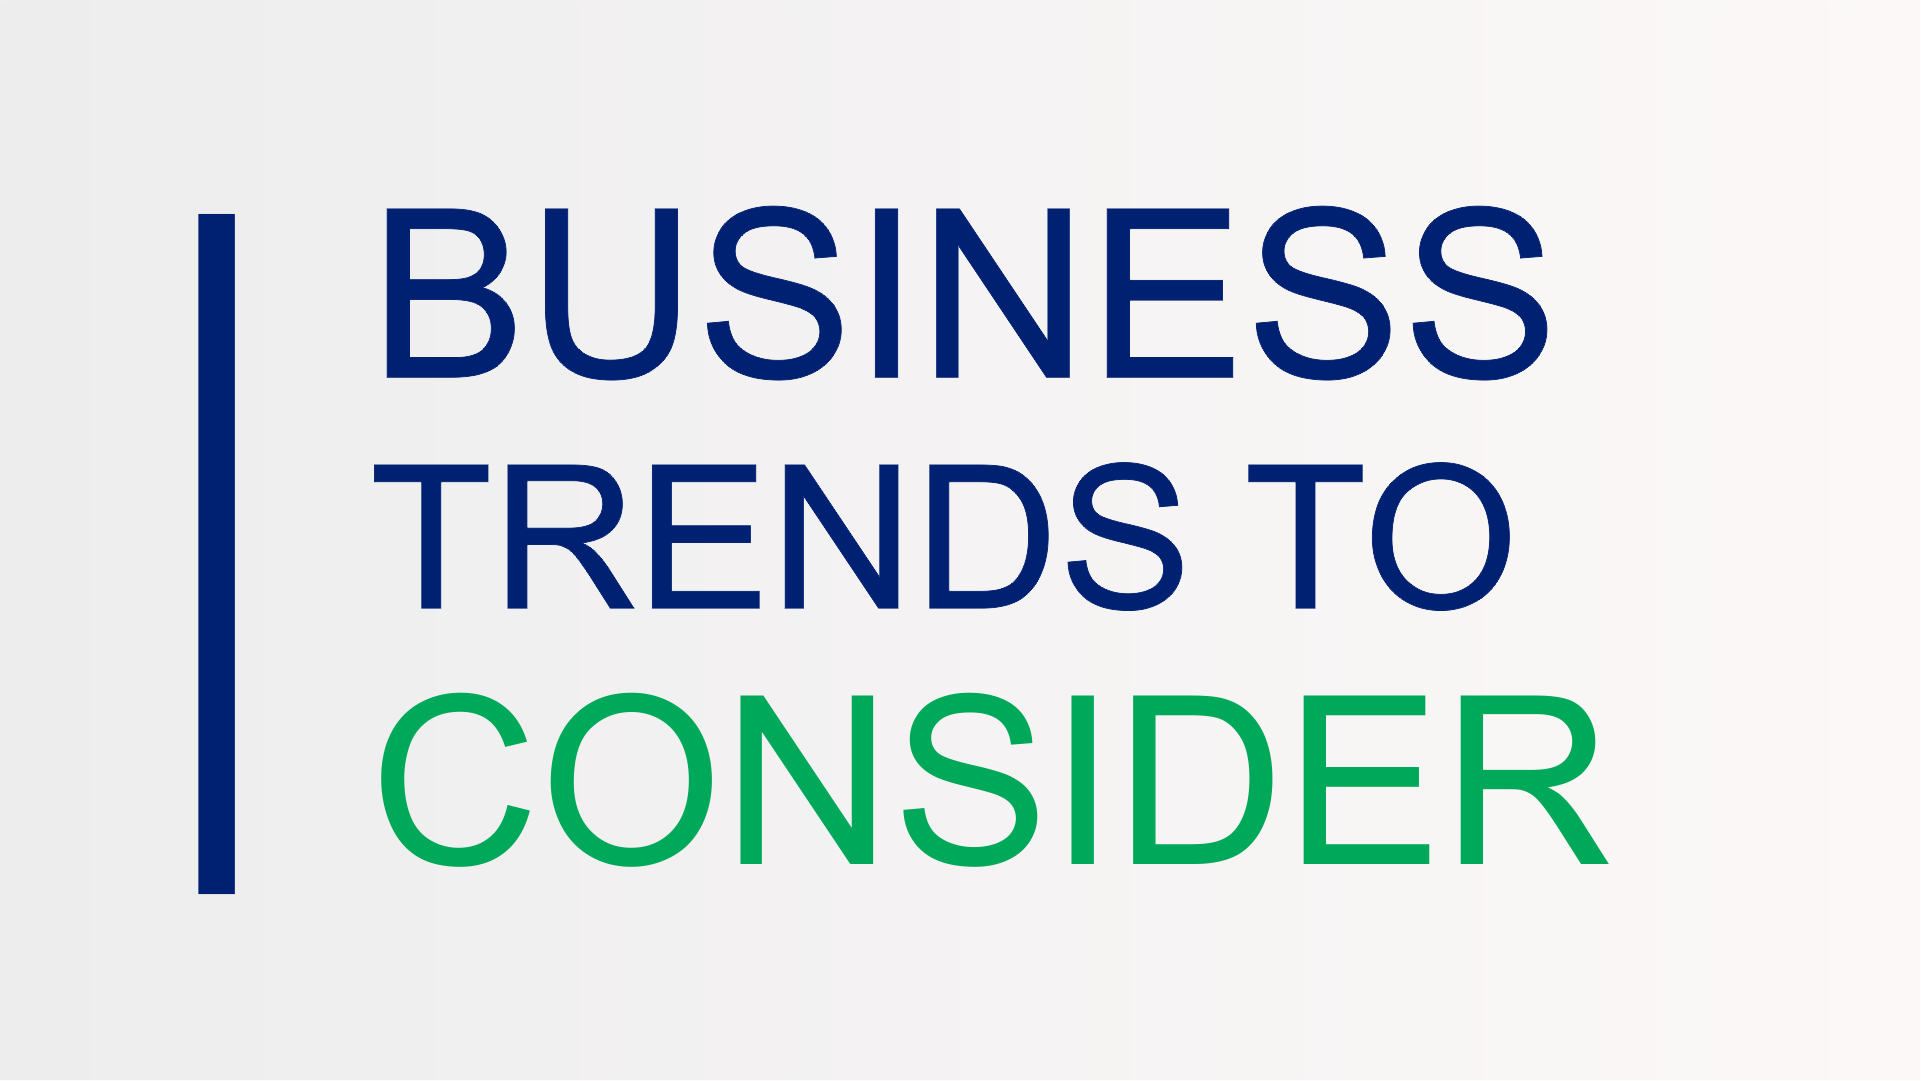 Three Business Trends To Consider in 2021